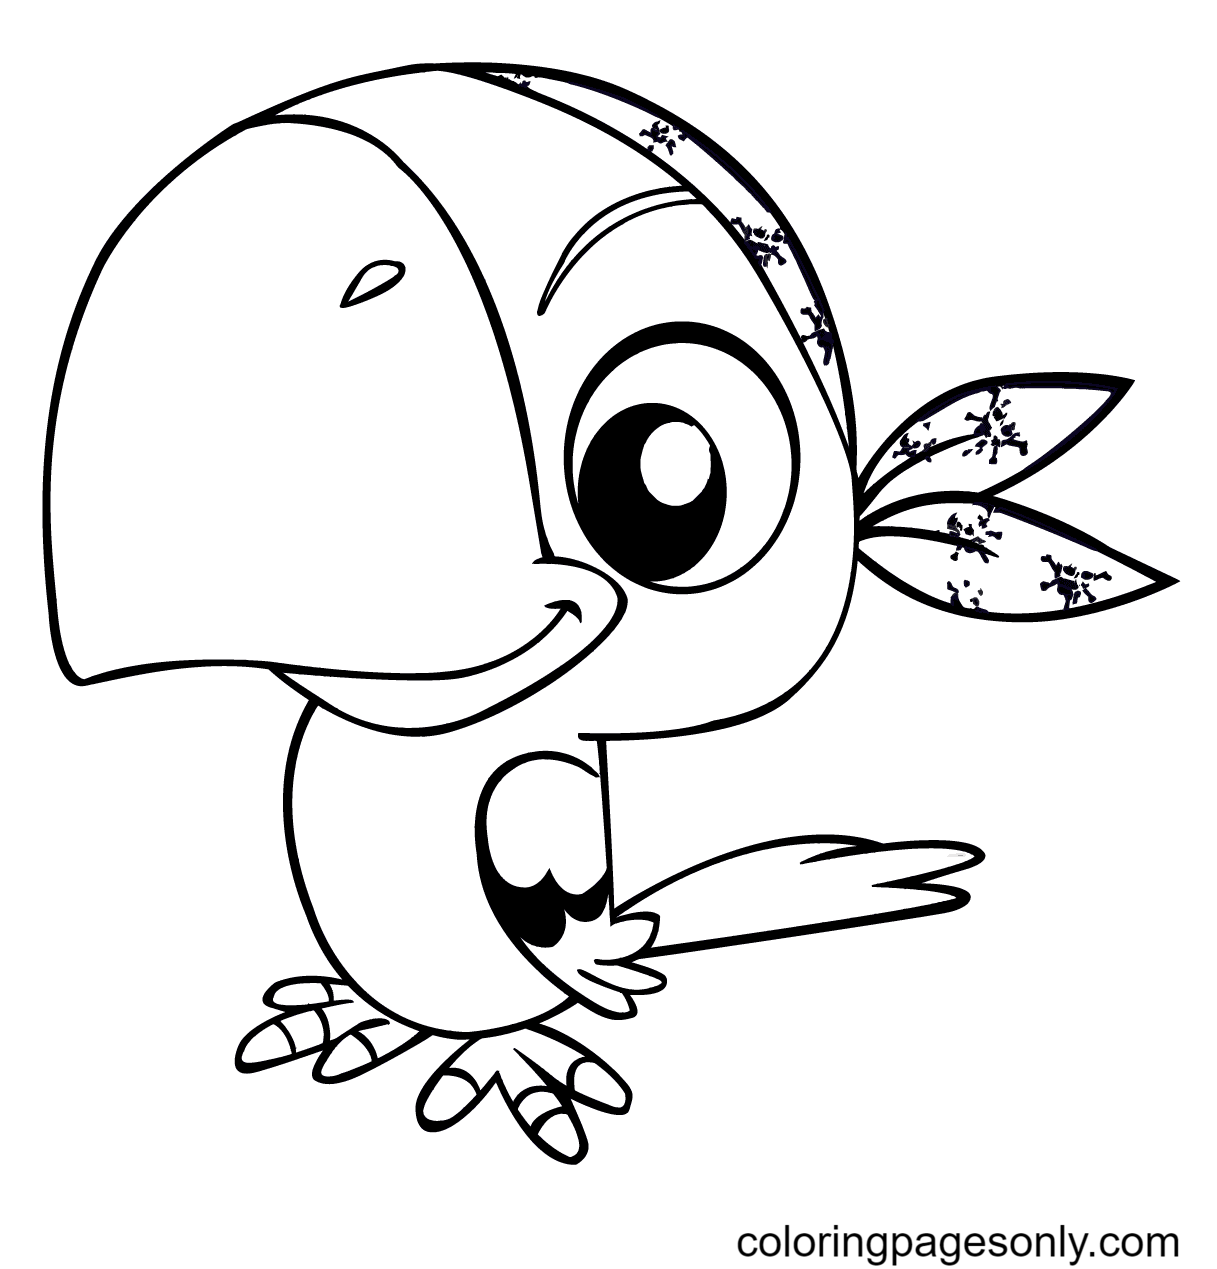 Cartoon Pirate Parrot Coloring Pages